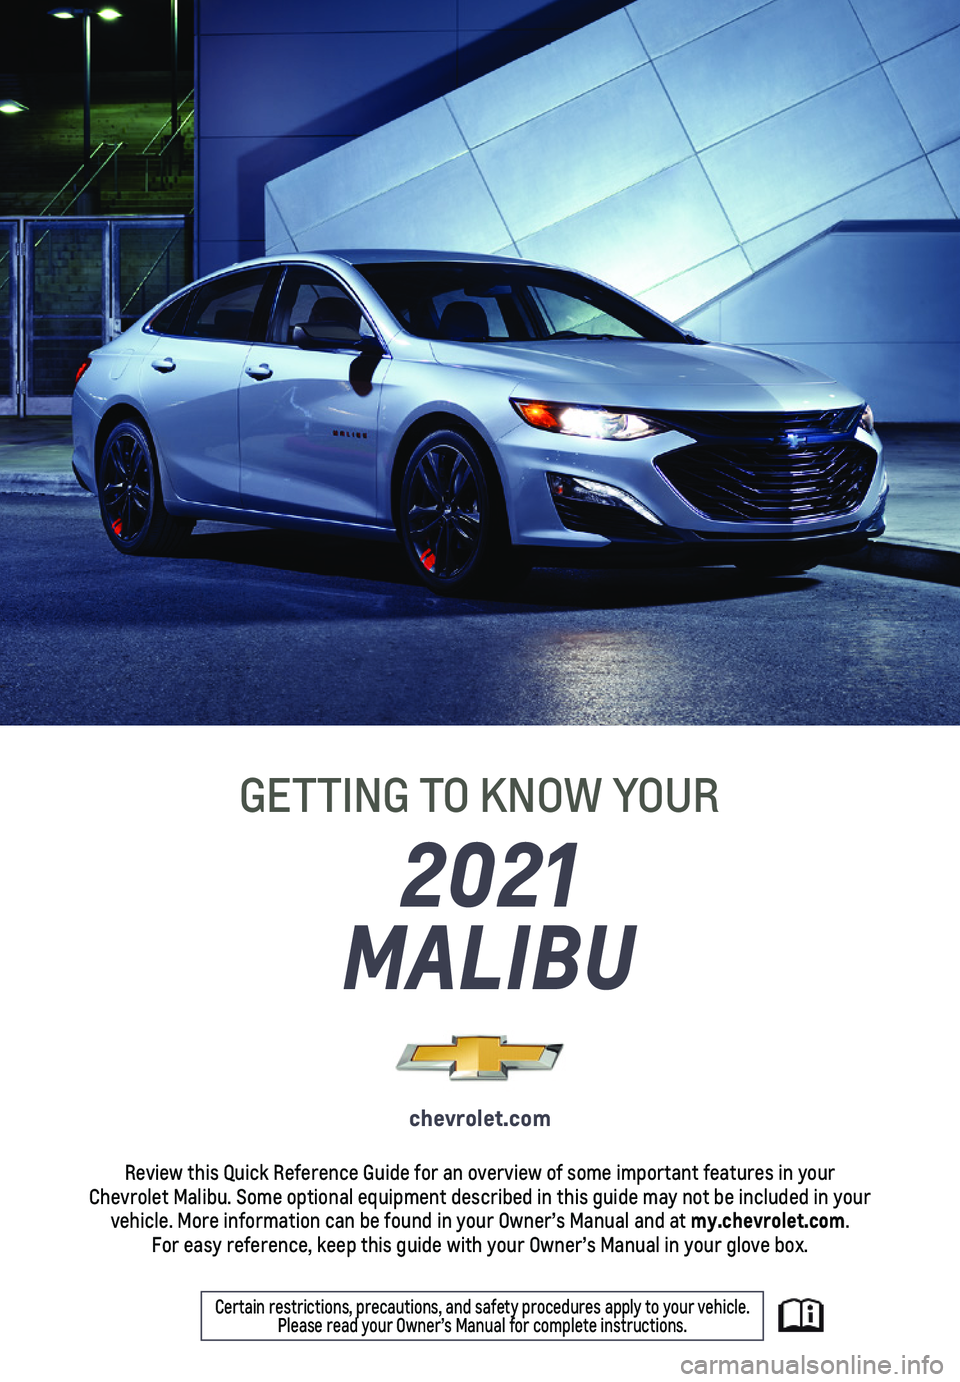 CHEVROLET MALIBU 2021  Get To Know Guide 1
2021 
MALIBU
GETTING TO KNOW YOUR
chevrolet.com
Review this Quick Reference Guide for an overview of some important feat\
ures in your  Chevrolet Malibu. Some optional equipment described in this gu